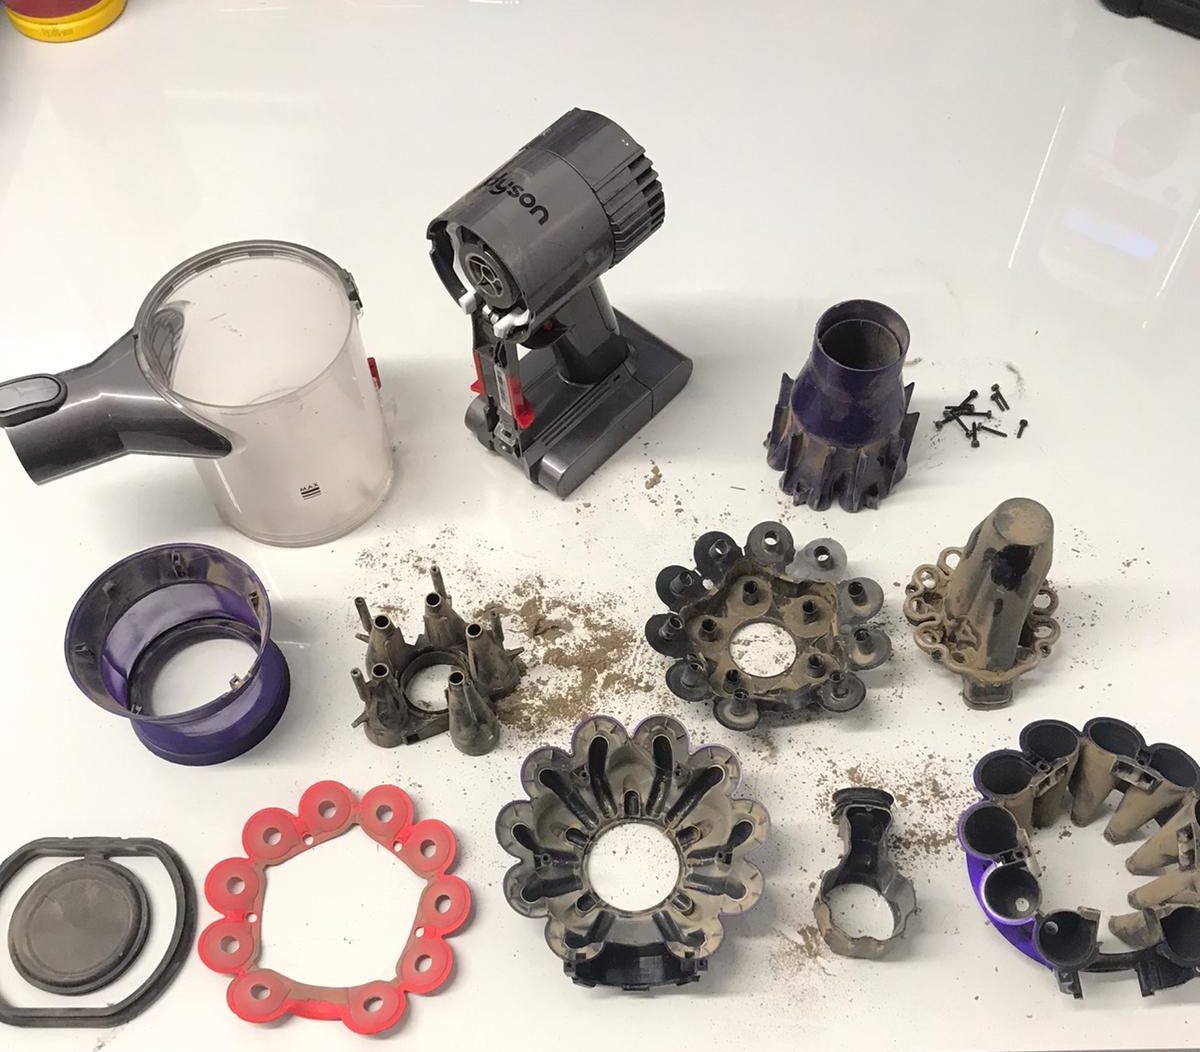 Dyson DC59 has come into the Vacuum Wizard for a full cyclone service.